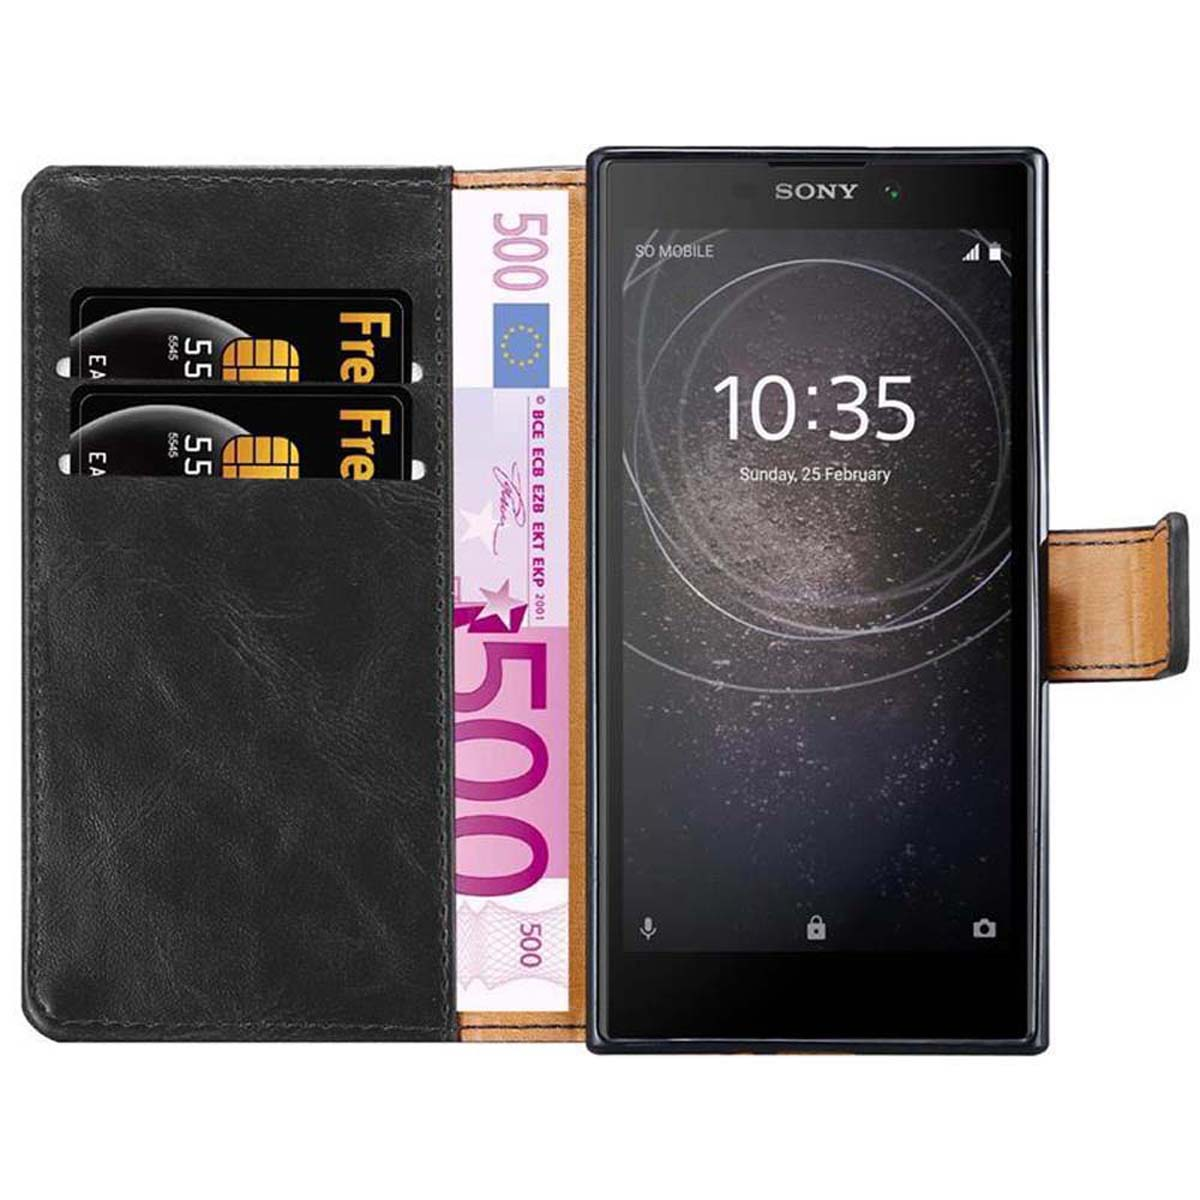 GRAPHIT Luxury Style, SCHWARZ Xperia Hülle Bookcover, L2, Book Sony, CADORABO